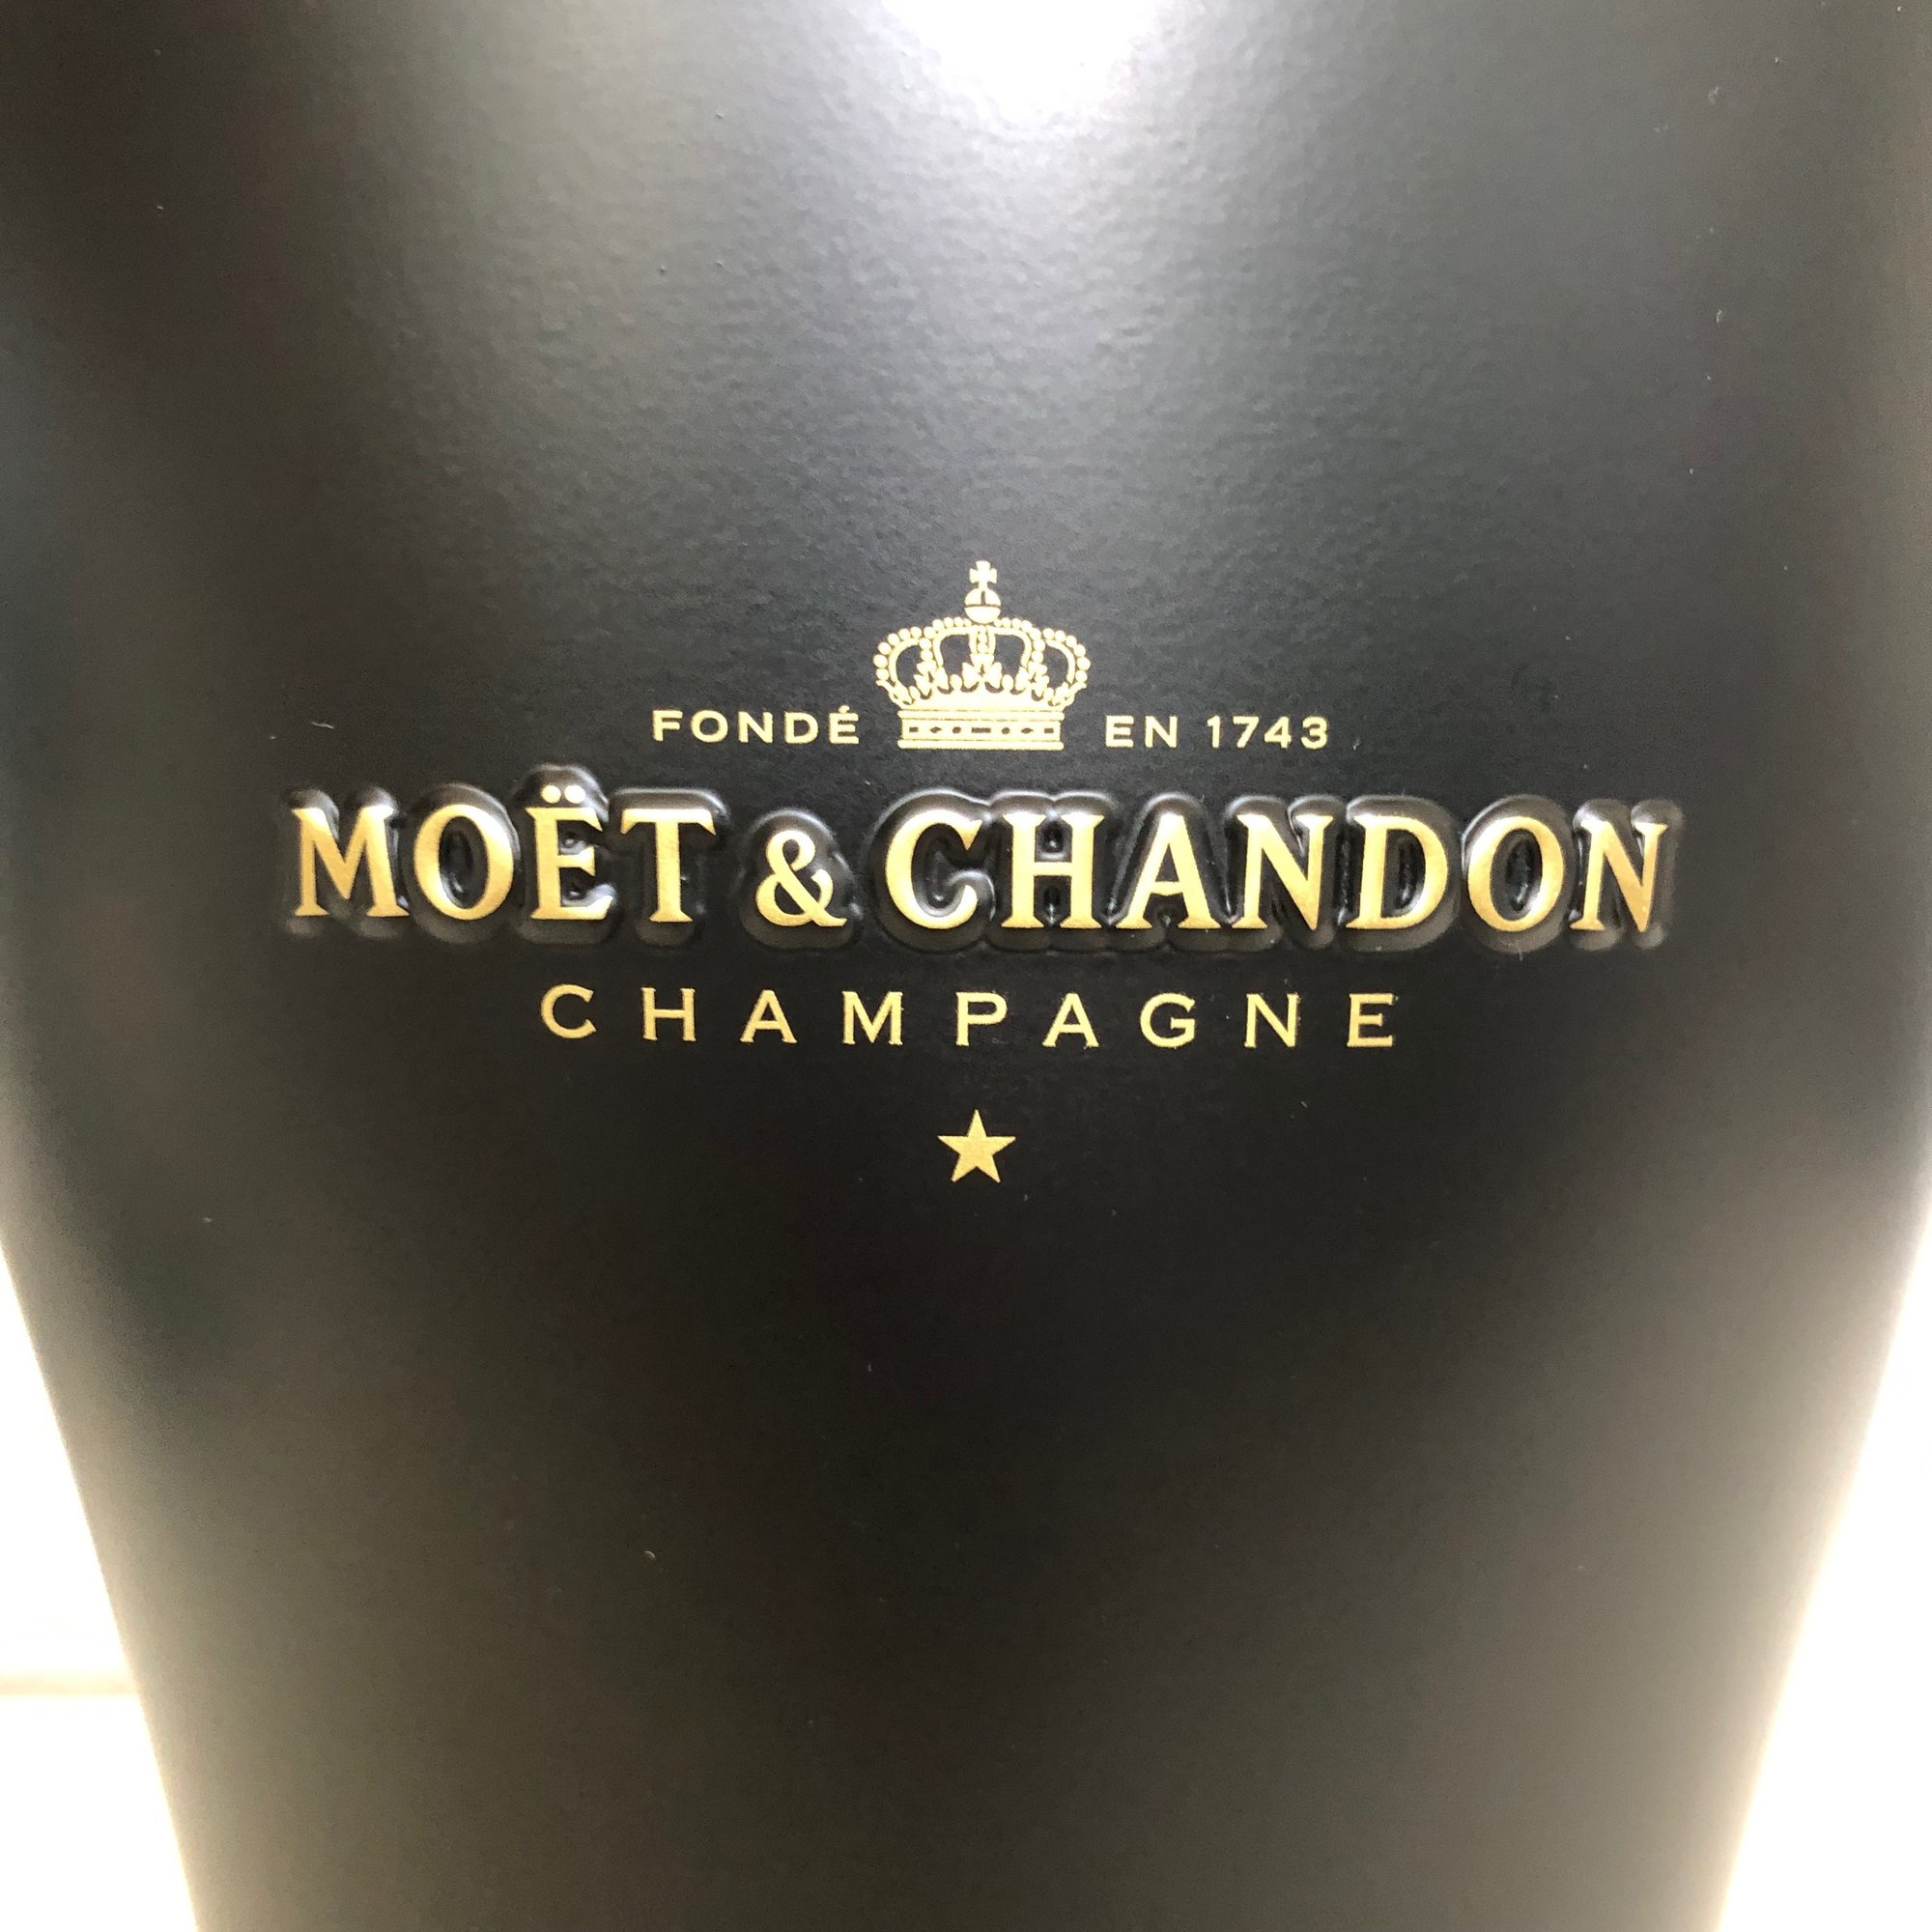 mo_t_chandon_champagne_bucket_in_gold_and_black_color_2020_design_champagneclub_7.JPG